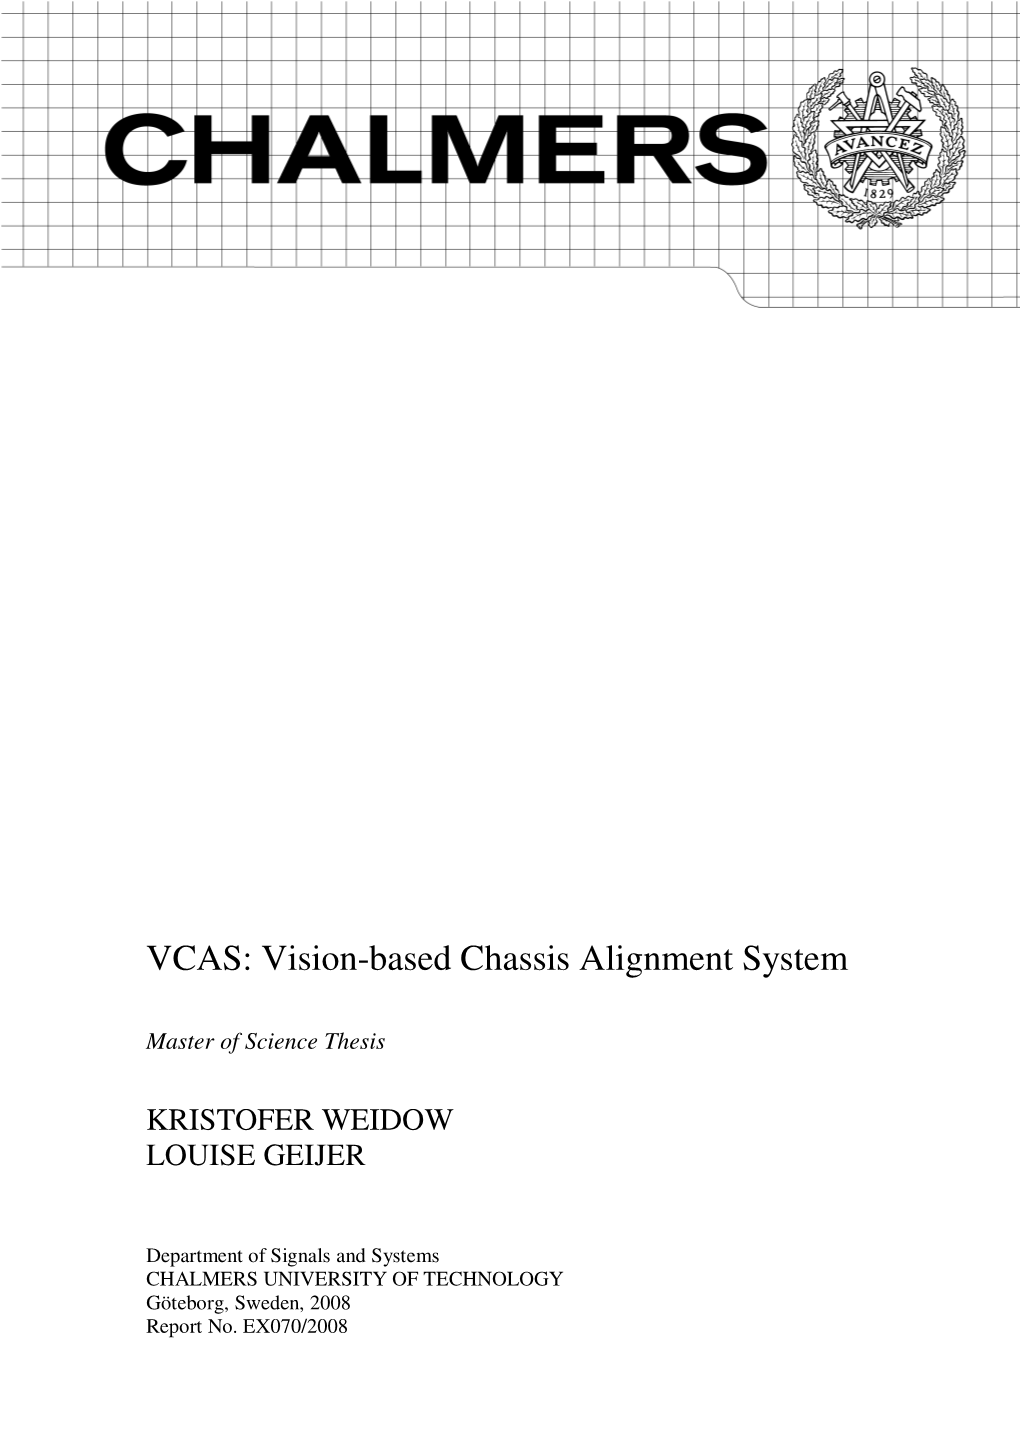 Vision-Based Chassis Alignment System